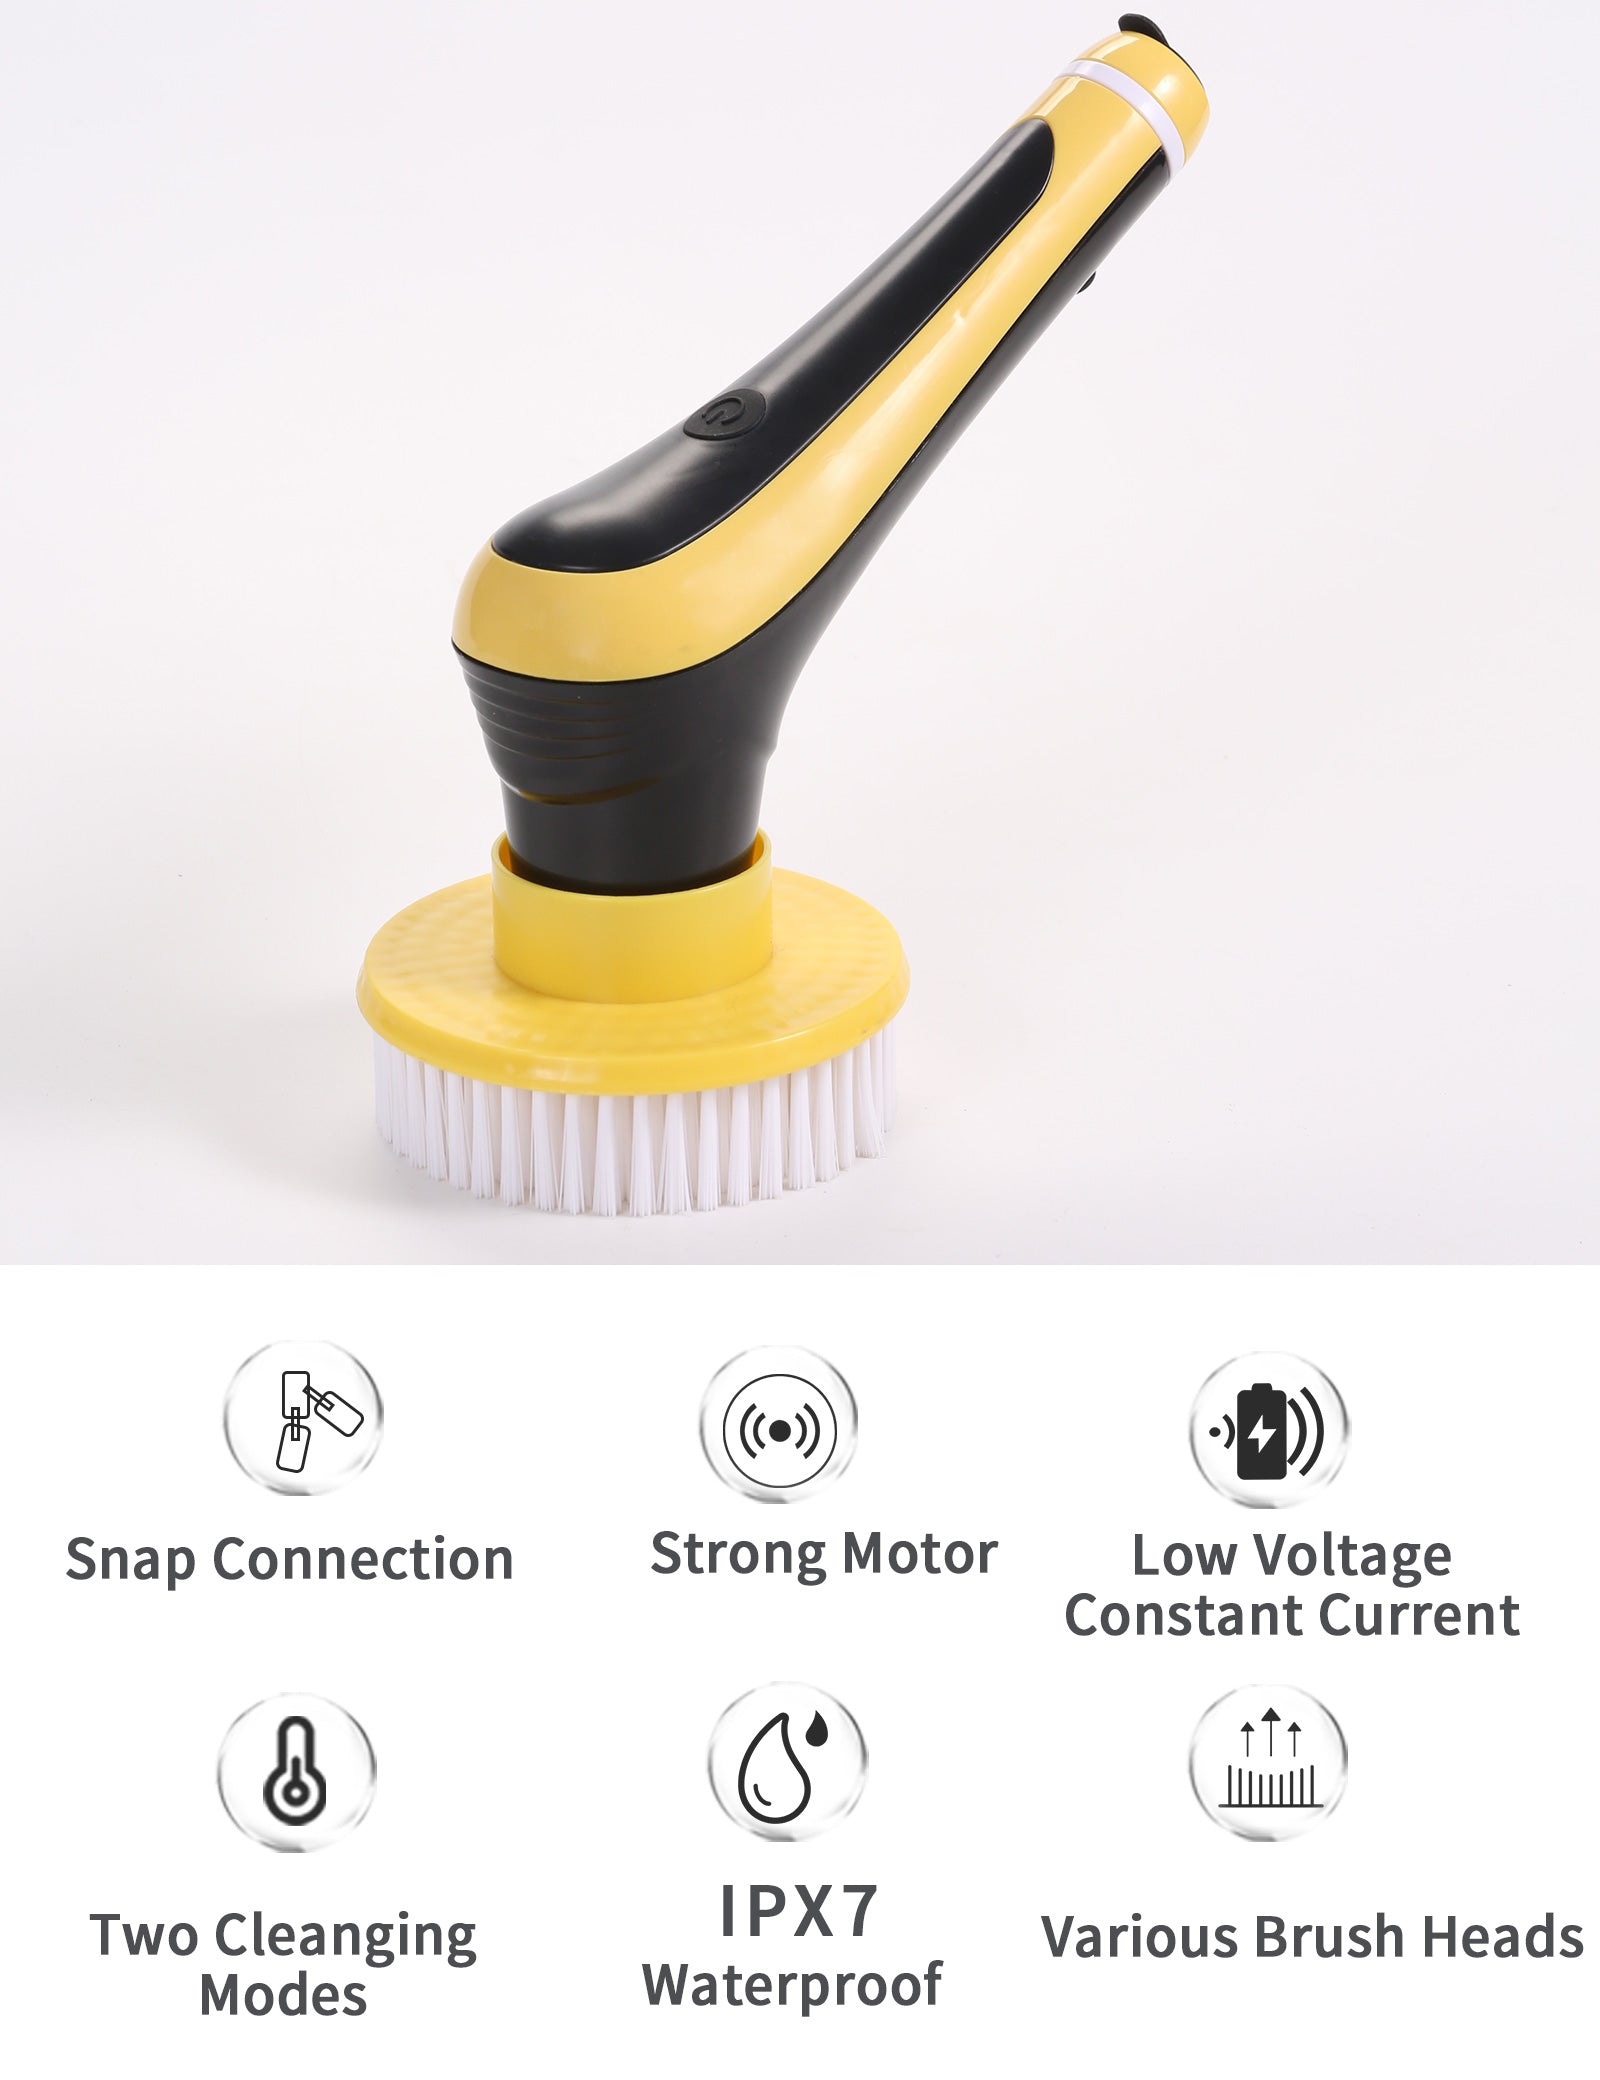 4 Brushes Head Cleaning Brush Electric Spin Scrubber for Bathroom